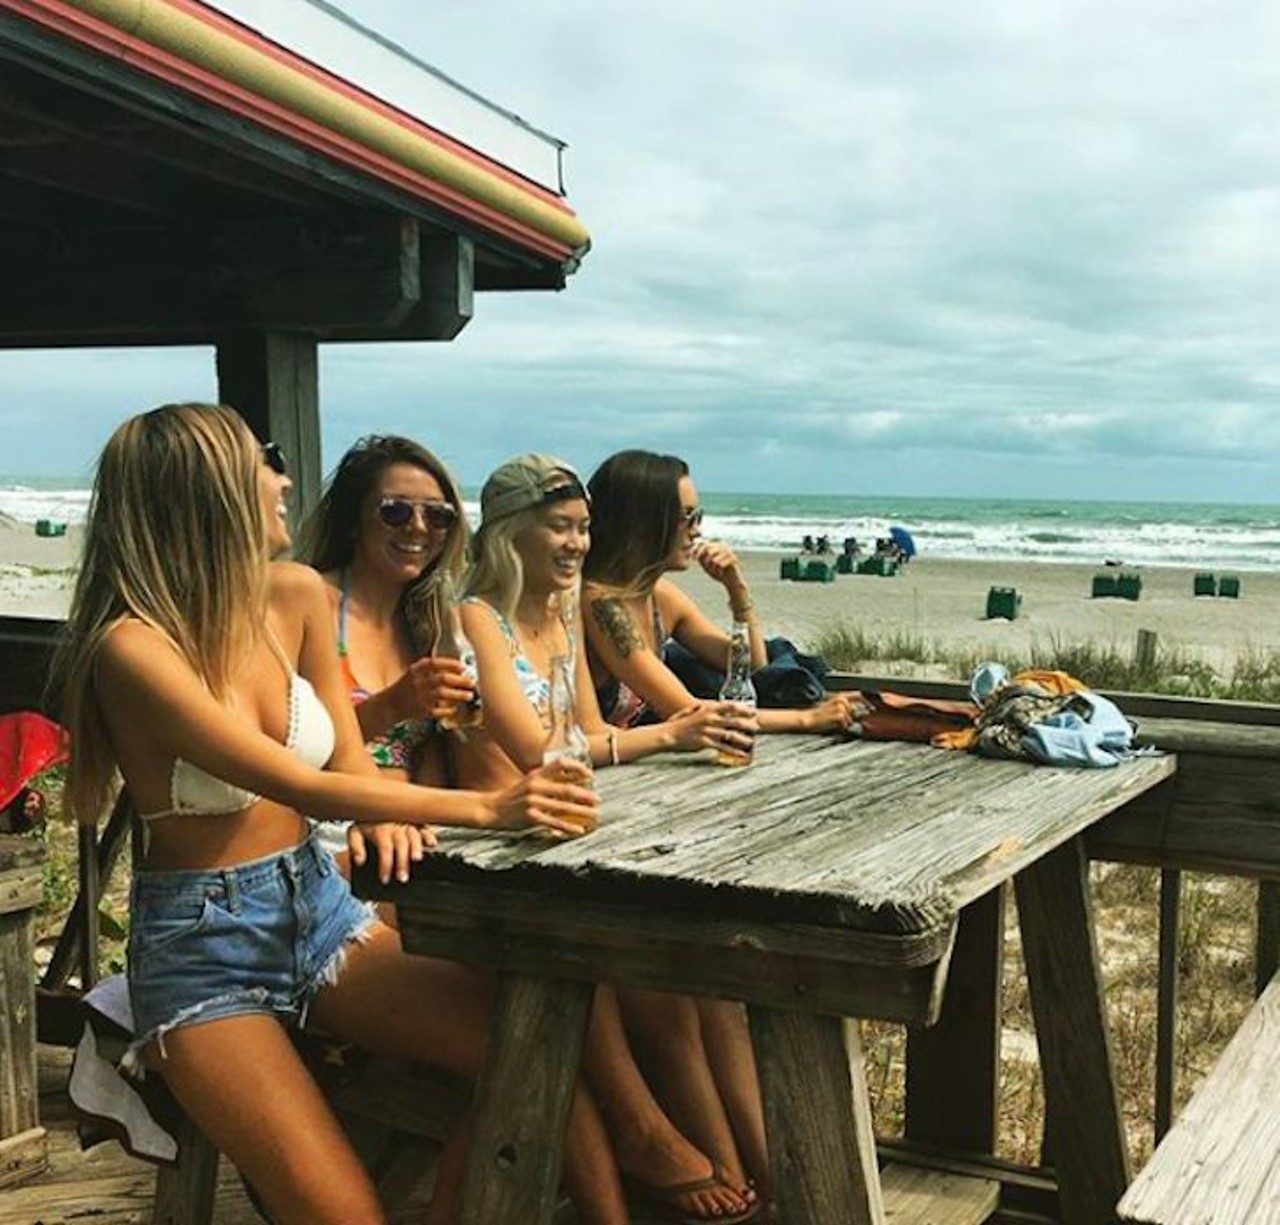 Grab some brews at the Beach Shack
42906, 1 Minutemen Causeway, Cocoa Beach, FL (321) 783-2250 
While Beach Shack does not offer food, it is admired by locals and out-of-towners, or &#147;shoobies,&#148; for dishing up cold drinks, live music and a front row seat for the beach. Any fan of blues, booze and beaches will be treated like a local here - you don&#146;t have to be from Cocoa to enjoy the festivities. 
Photo via broshark/Instagram